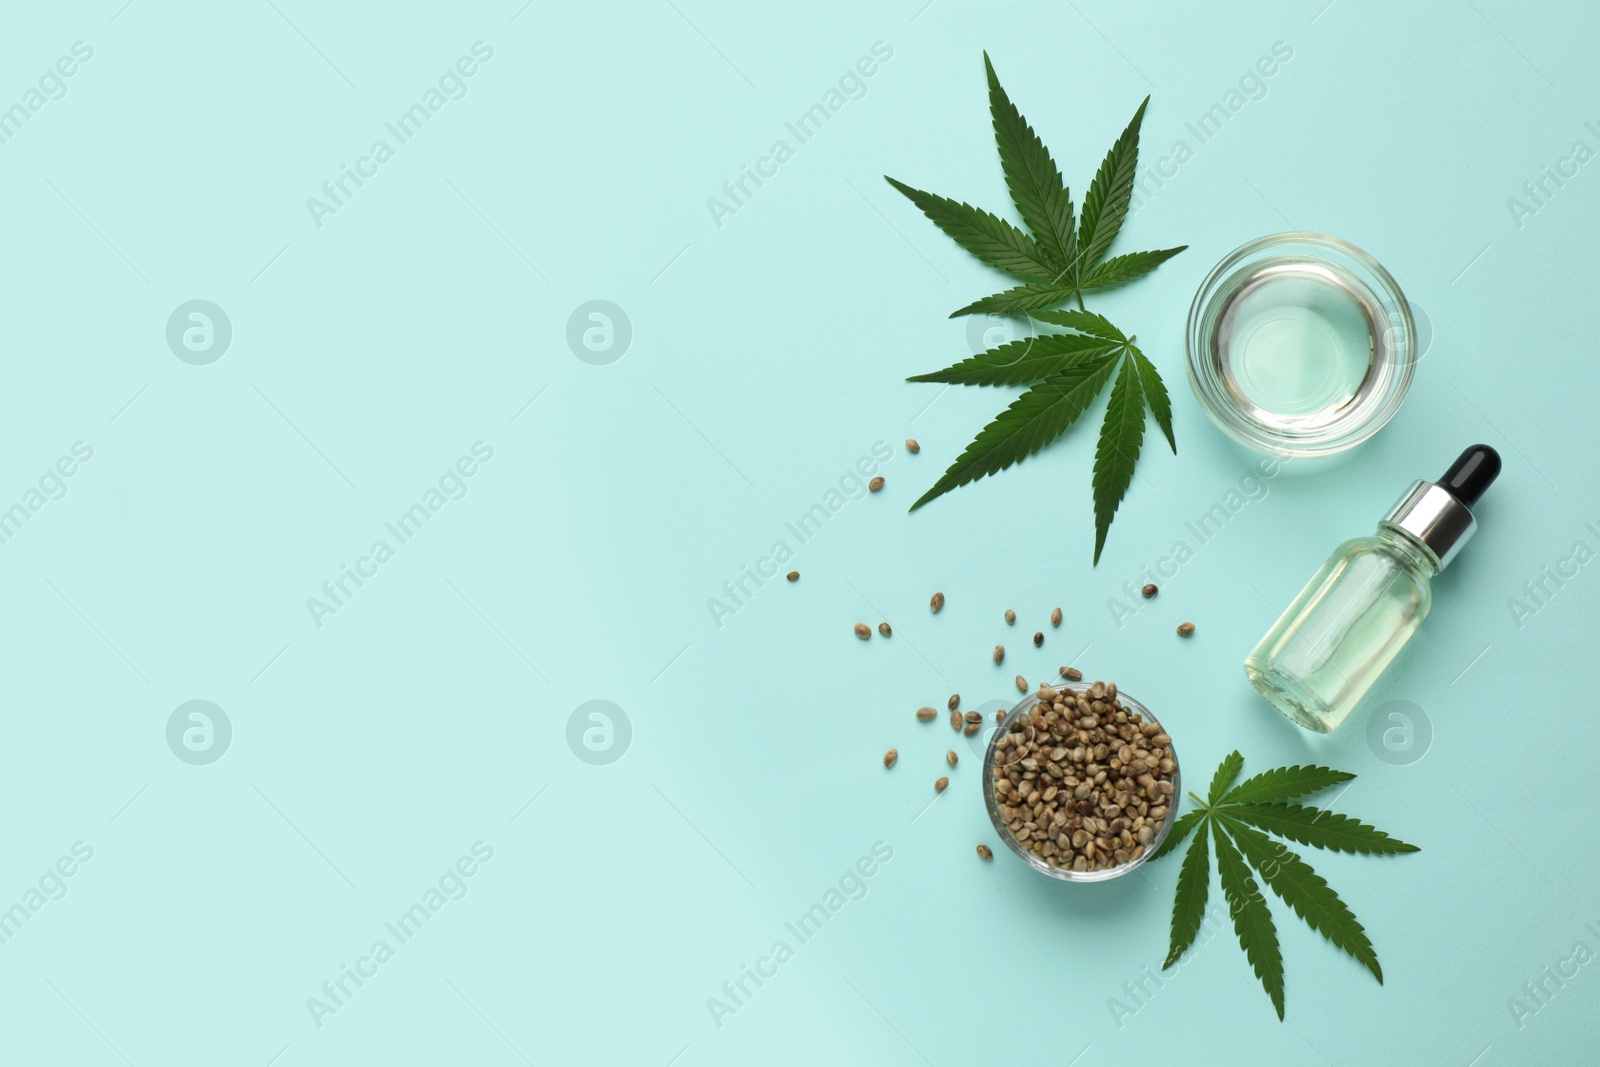 Photo of Flat lay composition with CBD oil or THC tincture and hemp leaves on light blue background, space for text